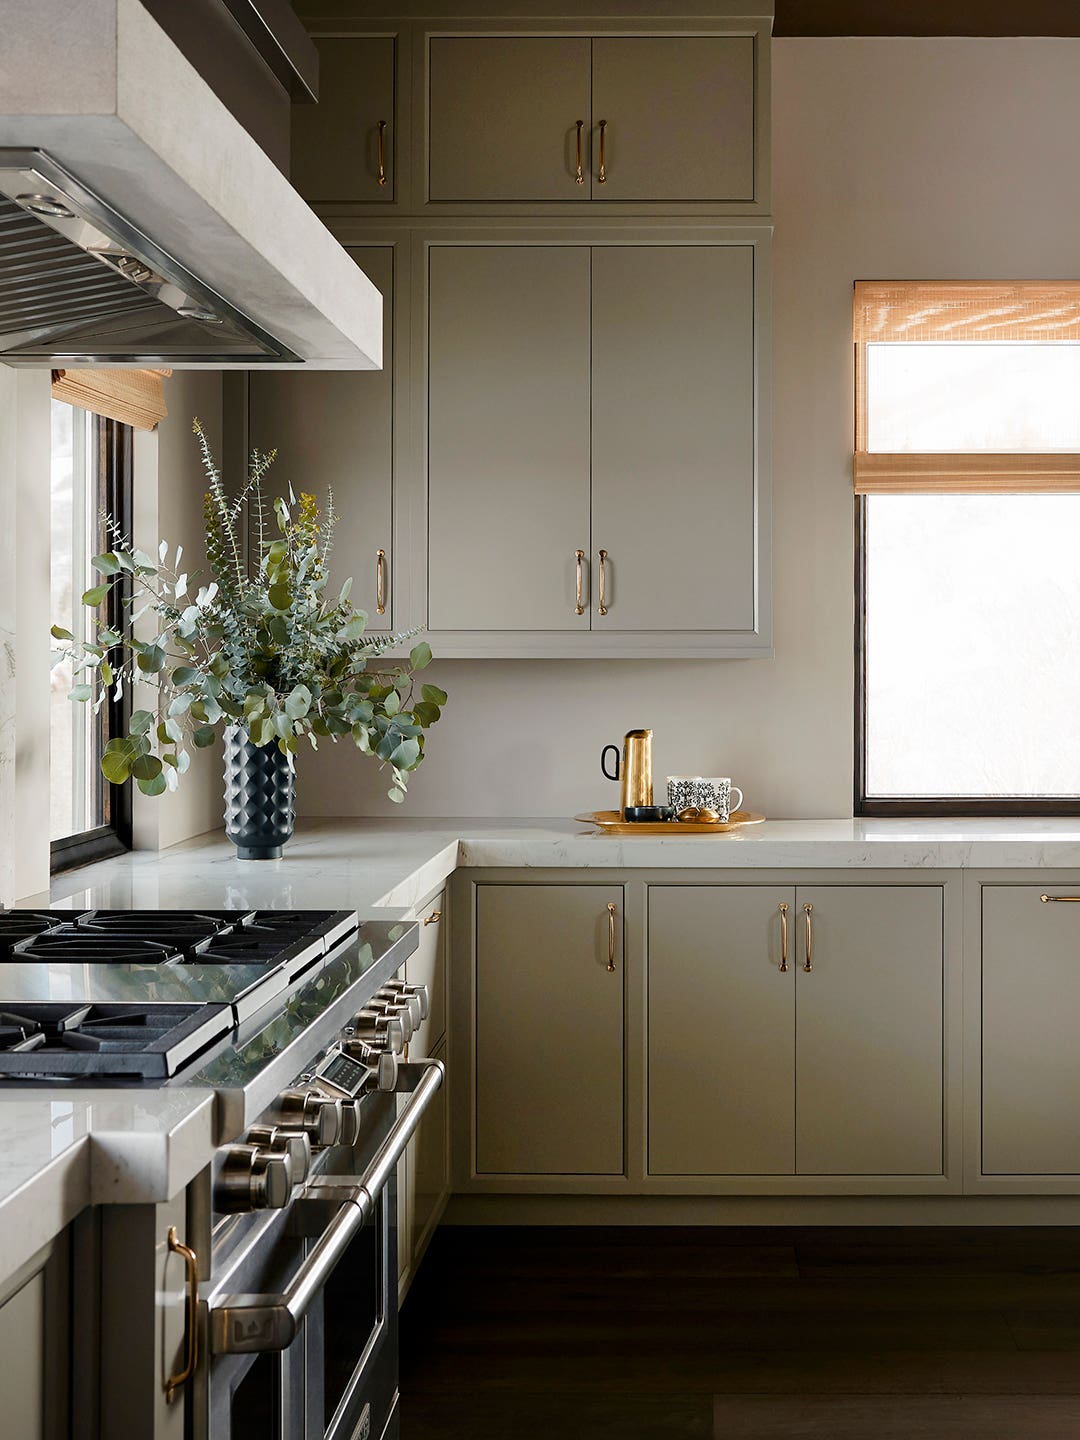 This Popular Kitchen Color Can Actually Hurt a Home’s Sale Price